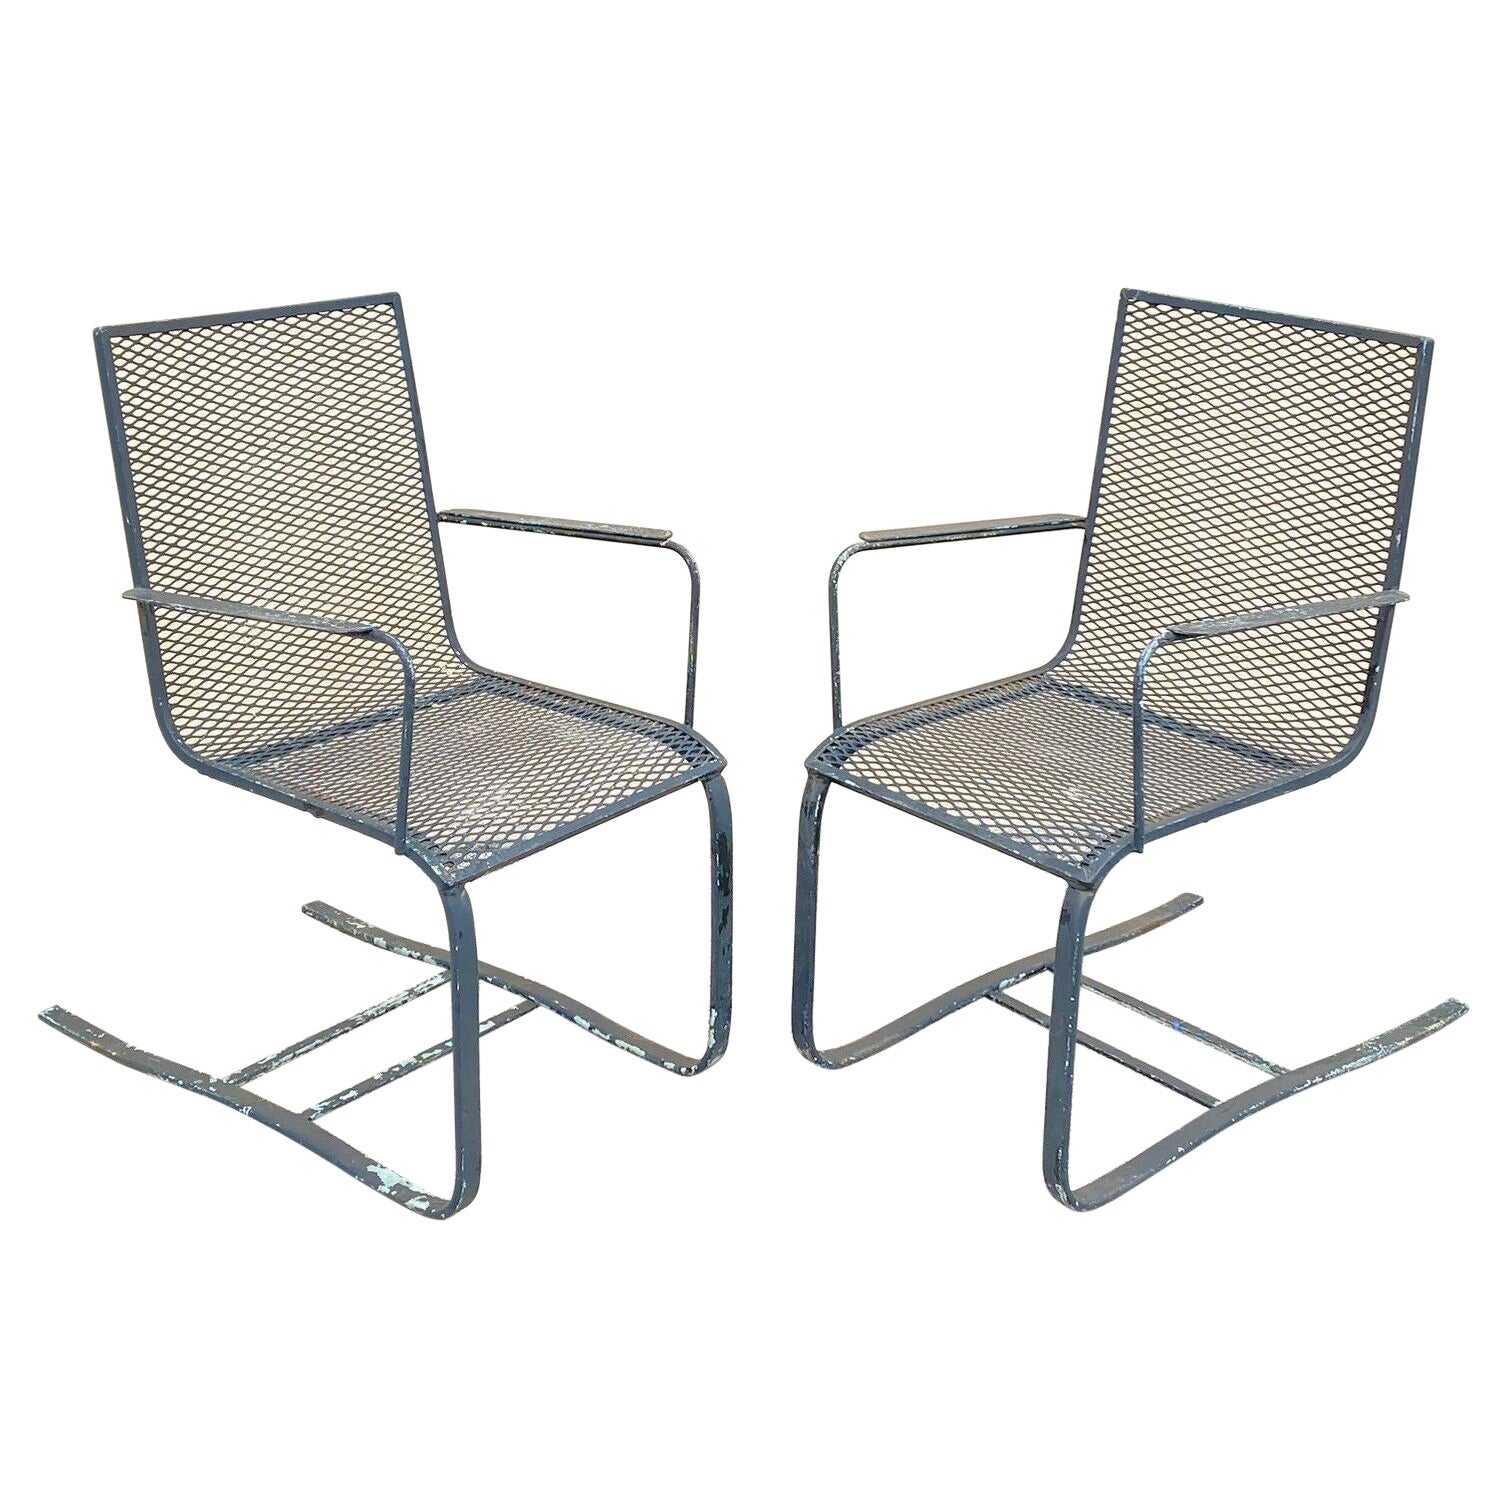 Industrial Modern Wrought Iron Metal Mesh Cantilever Garden Patio Chair - a Pair For Sale